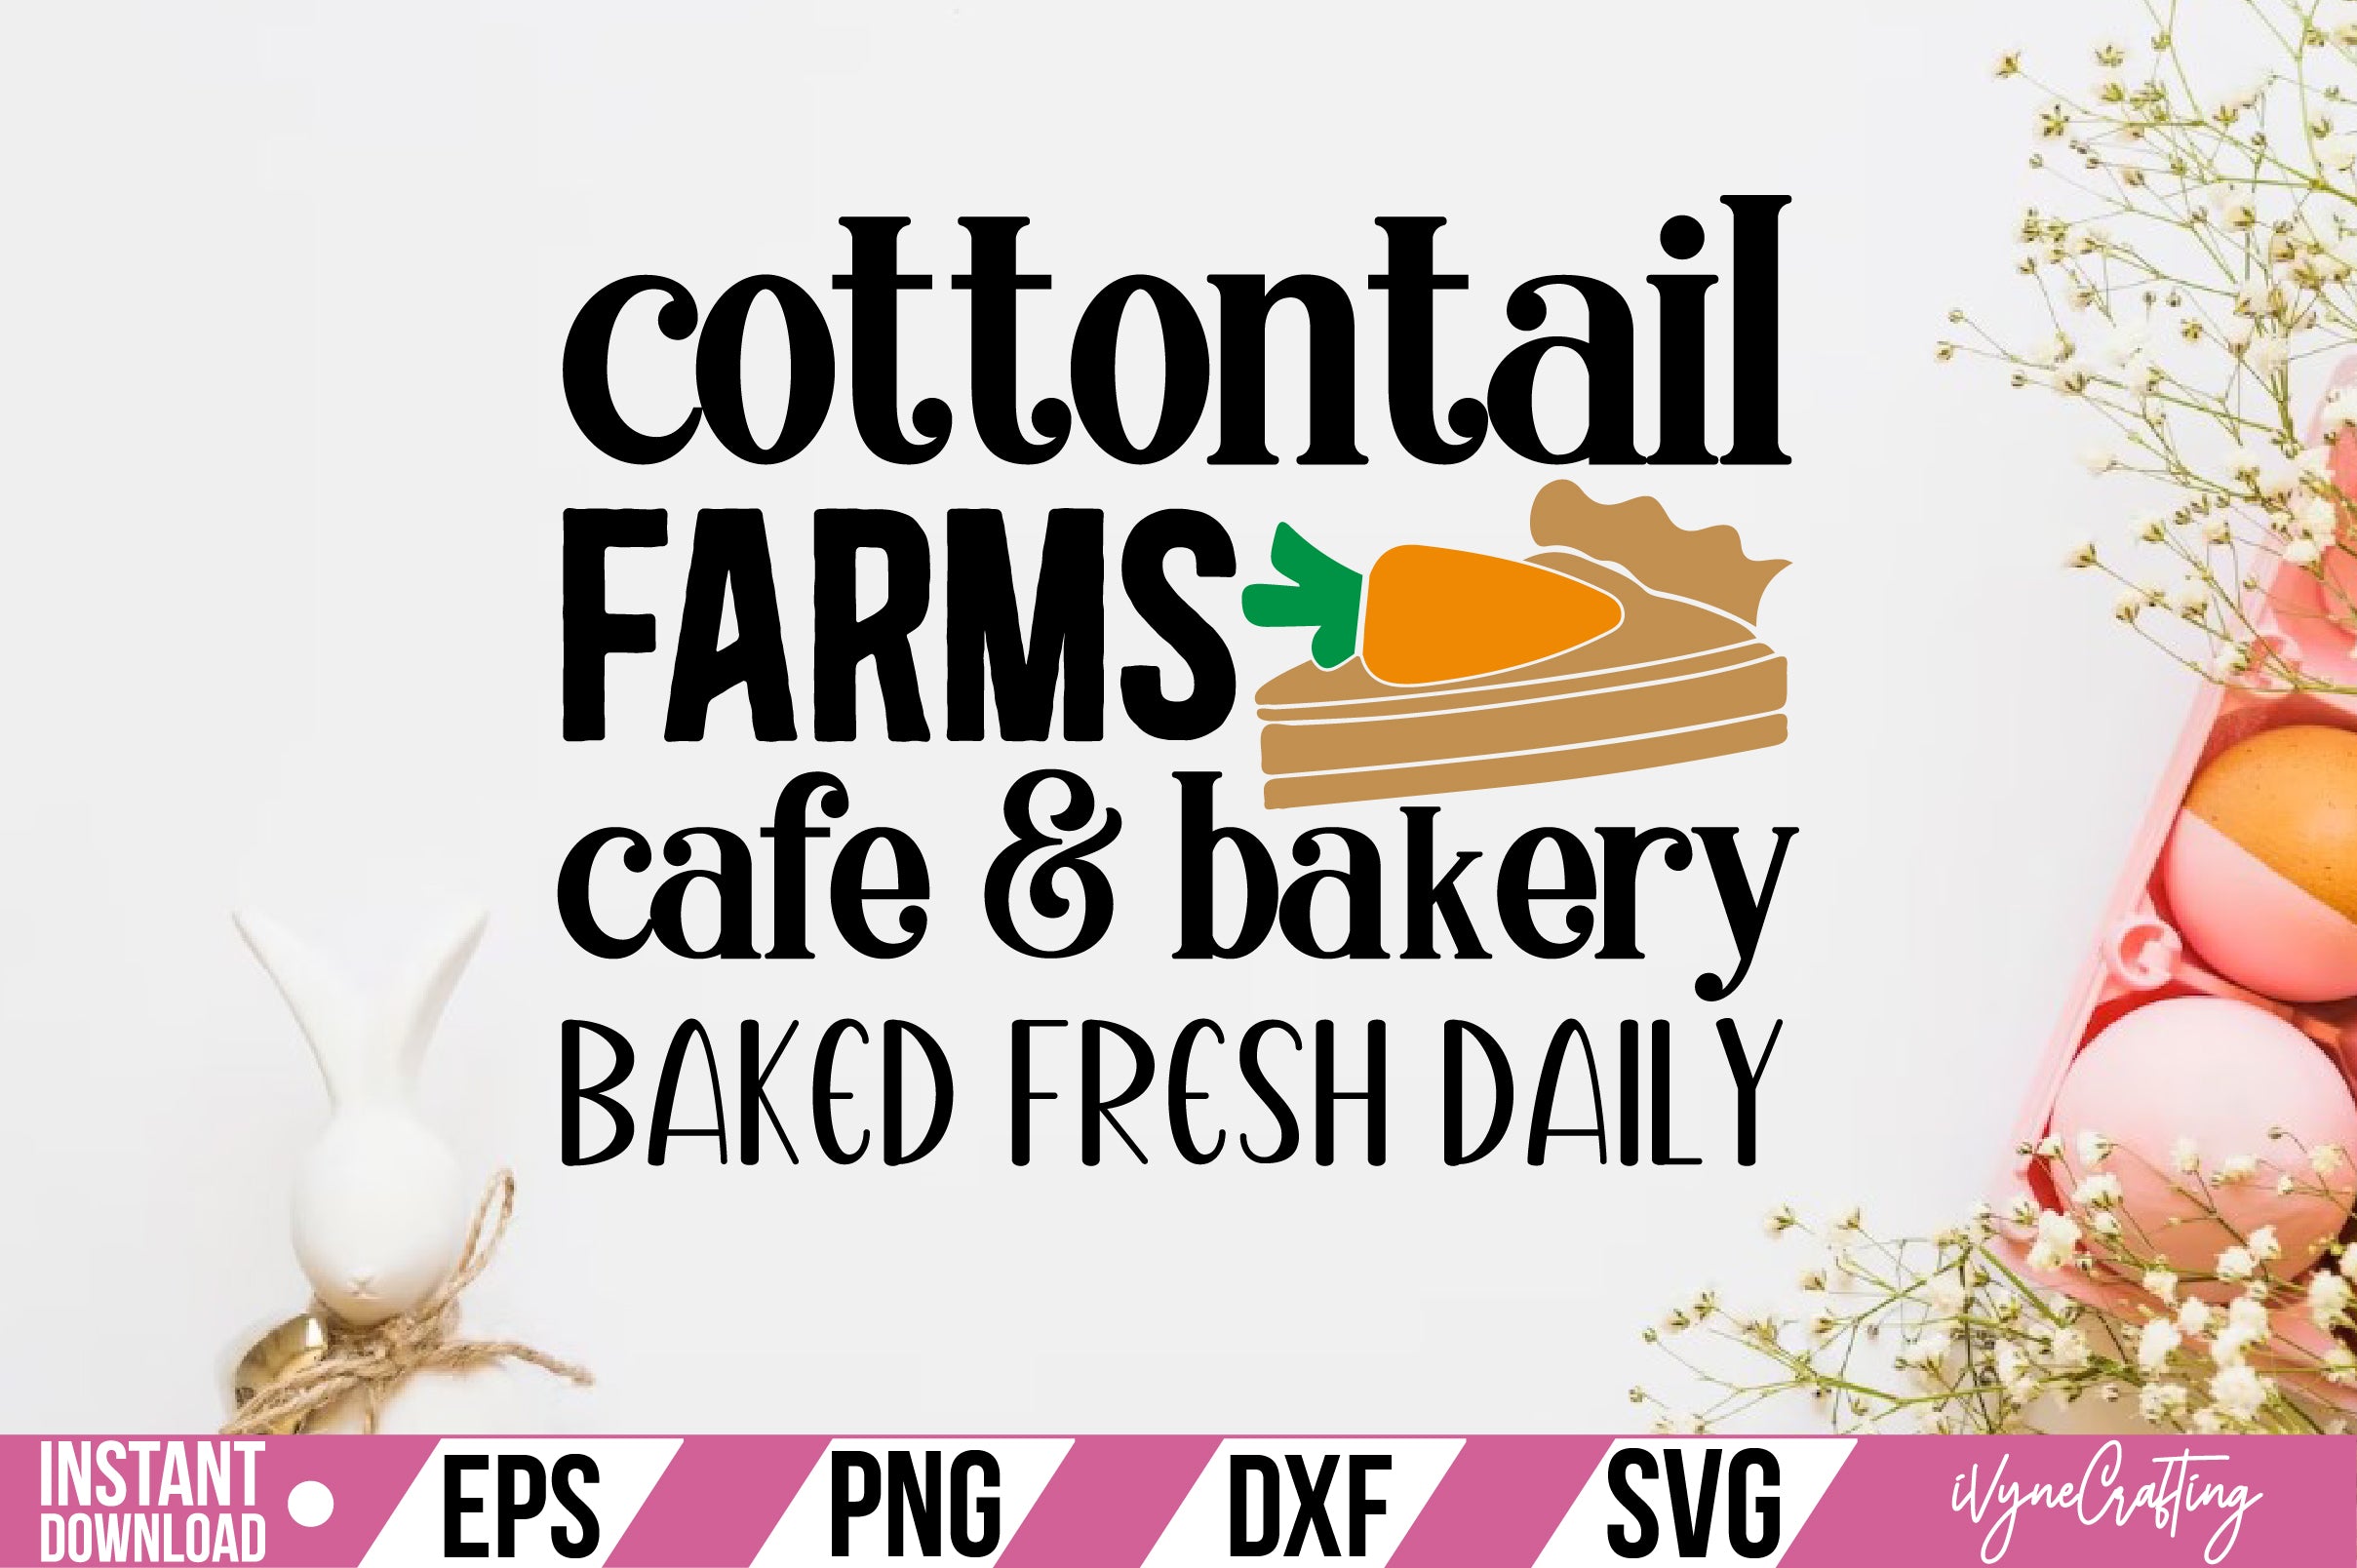 cottontail farms cafe & bakery baked fresh daily SVG Cut File